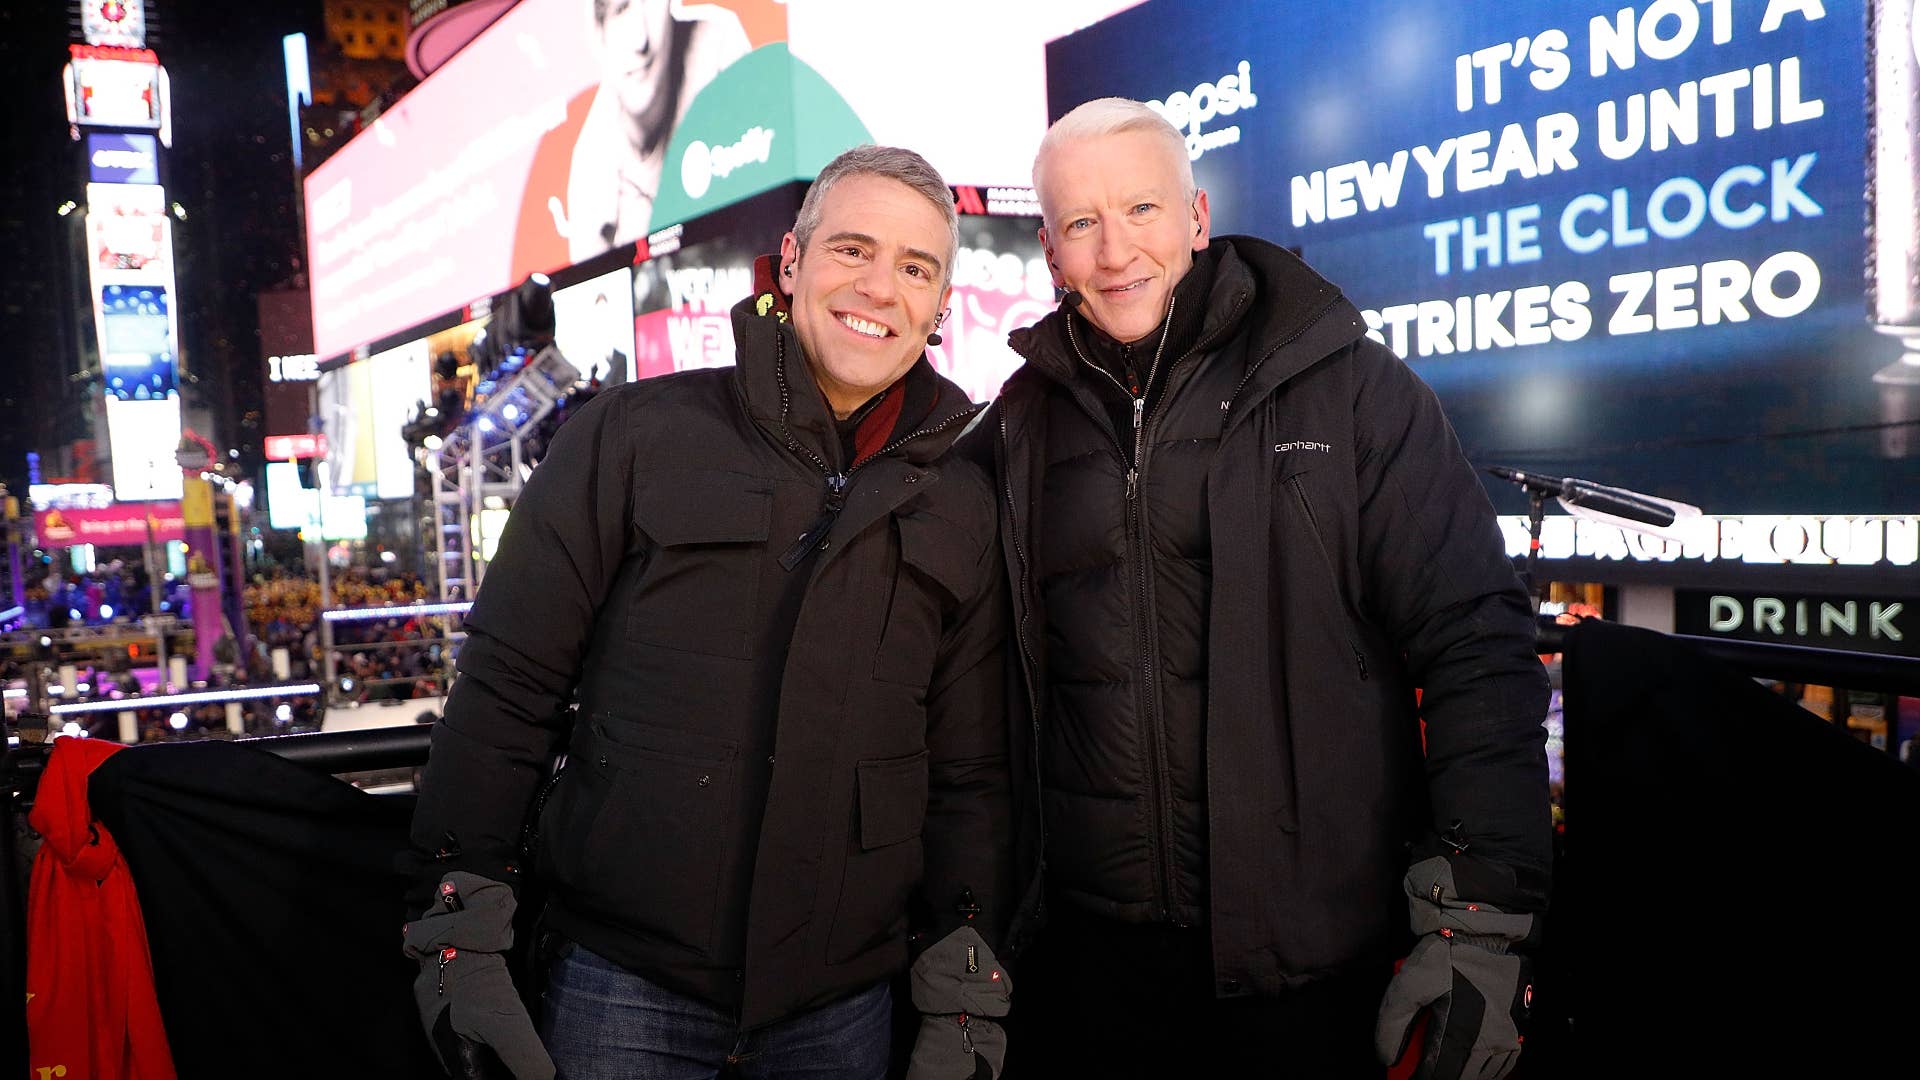 Andy Cohen and Anderson Cooper host CNN's New Year's Eve coverage at Times Square.